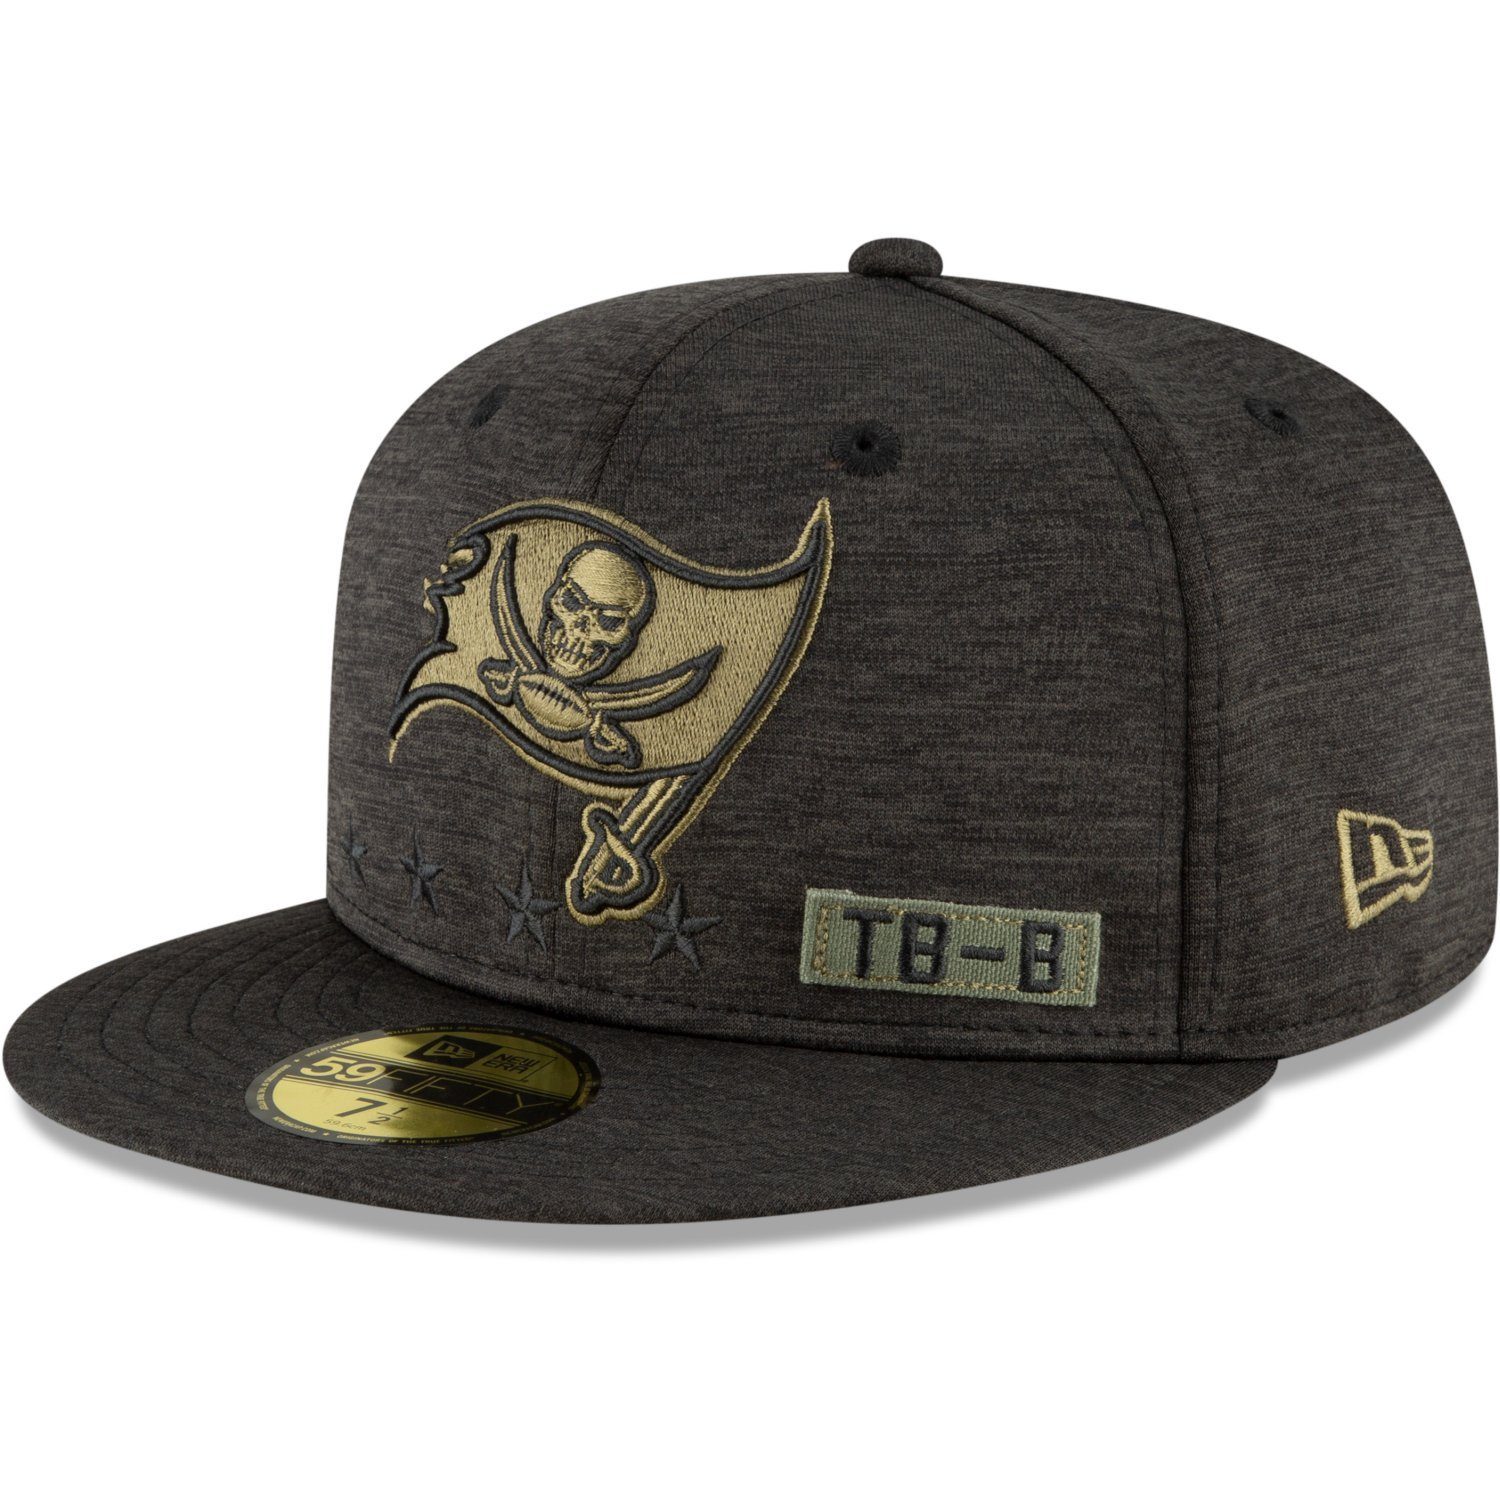 New Era Fitted Cap 59FIFTY NFL Salute to Service 2020 Tampa Bay Buccaneers | Fitted Caps